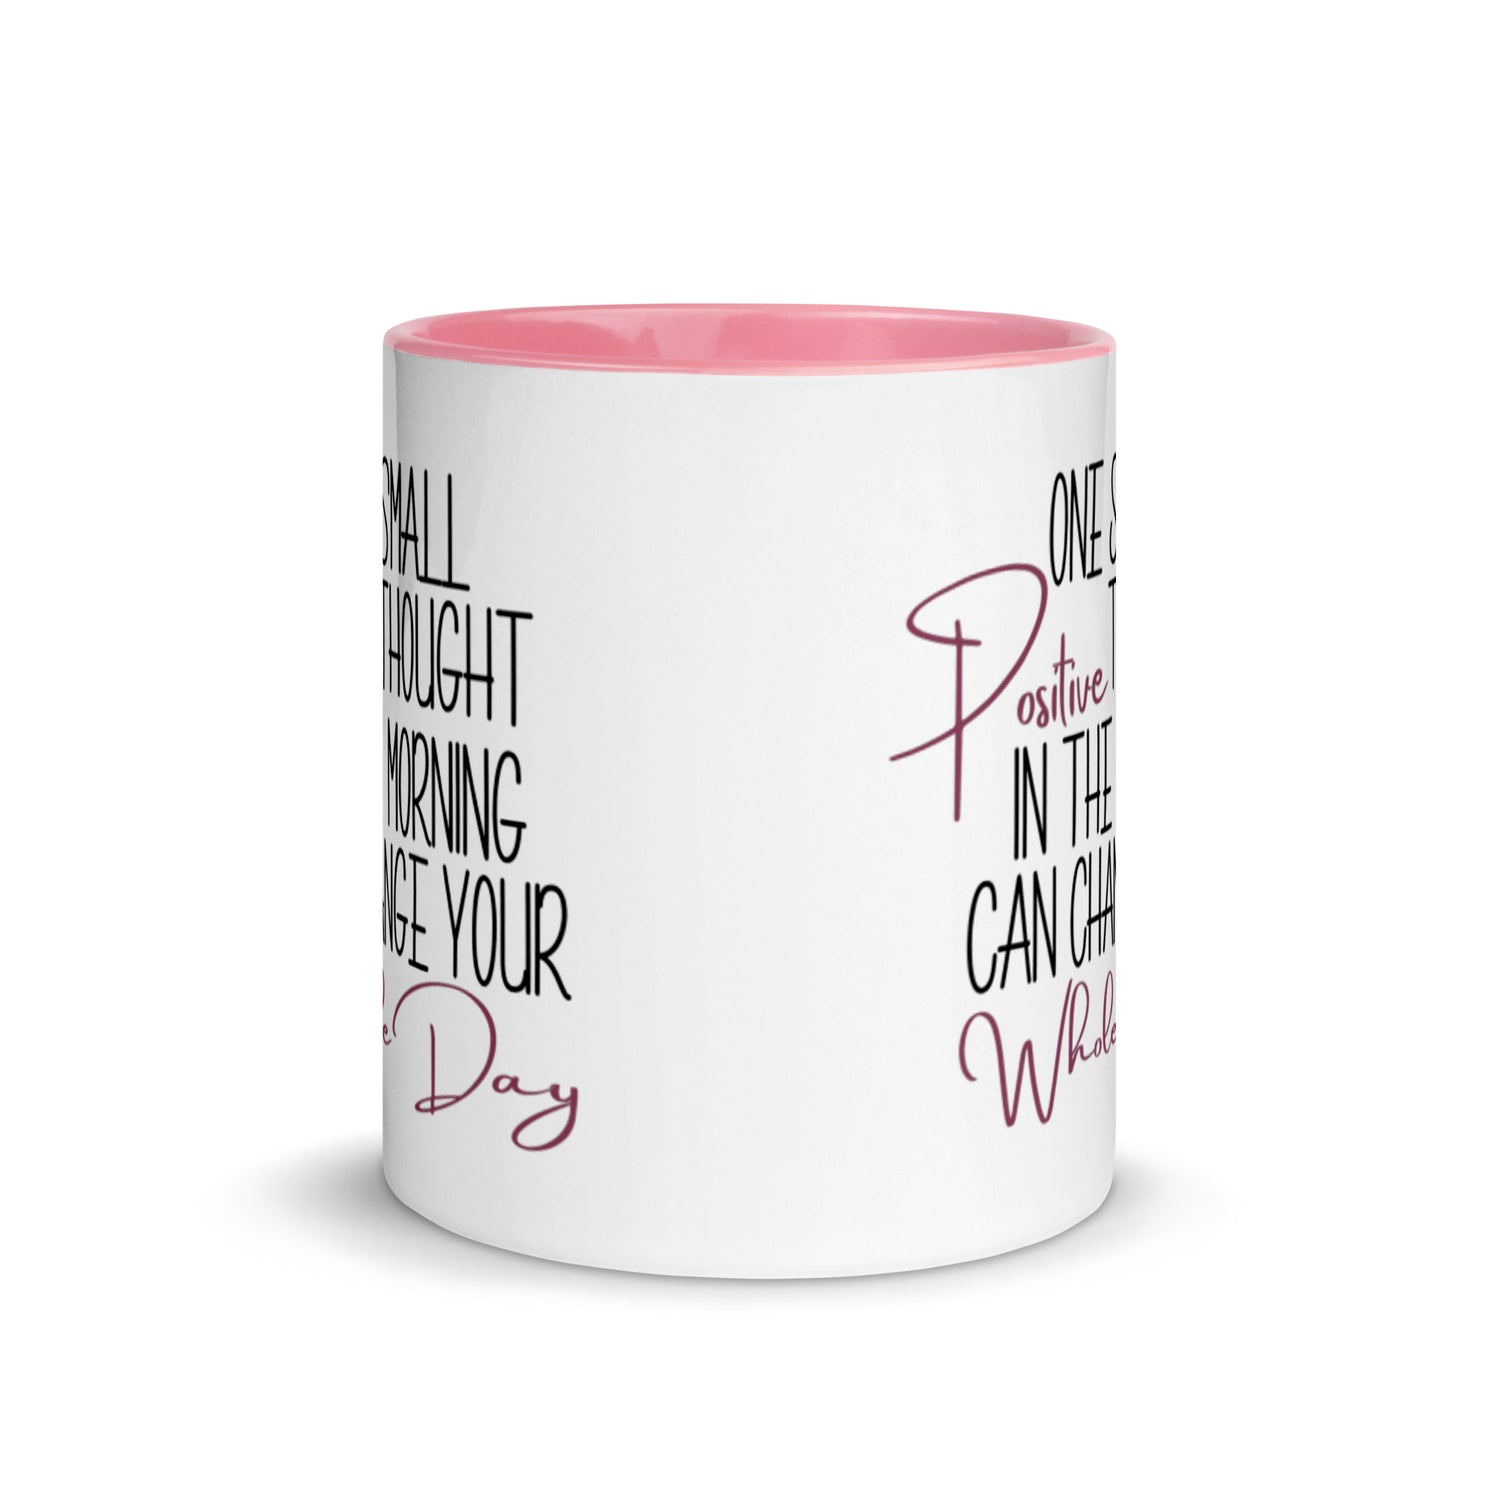 One Small Positive Thought in the Morning Can Change Your Whole Day Mug with pink interior and handle